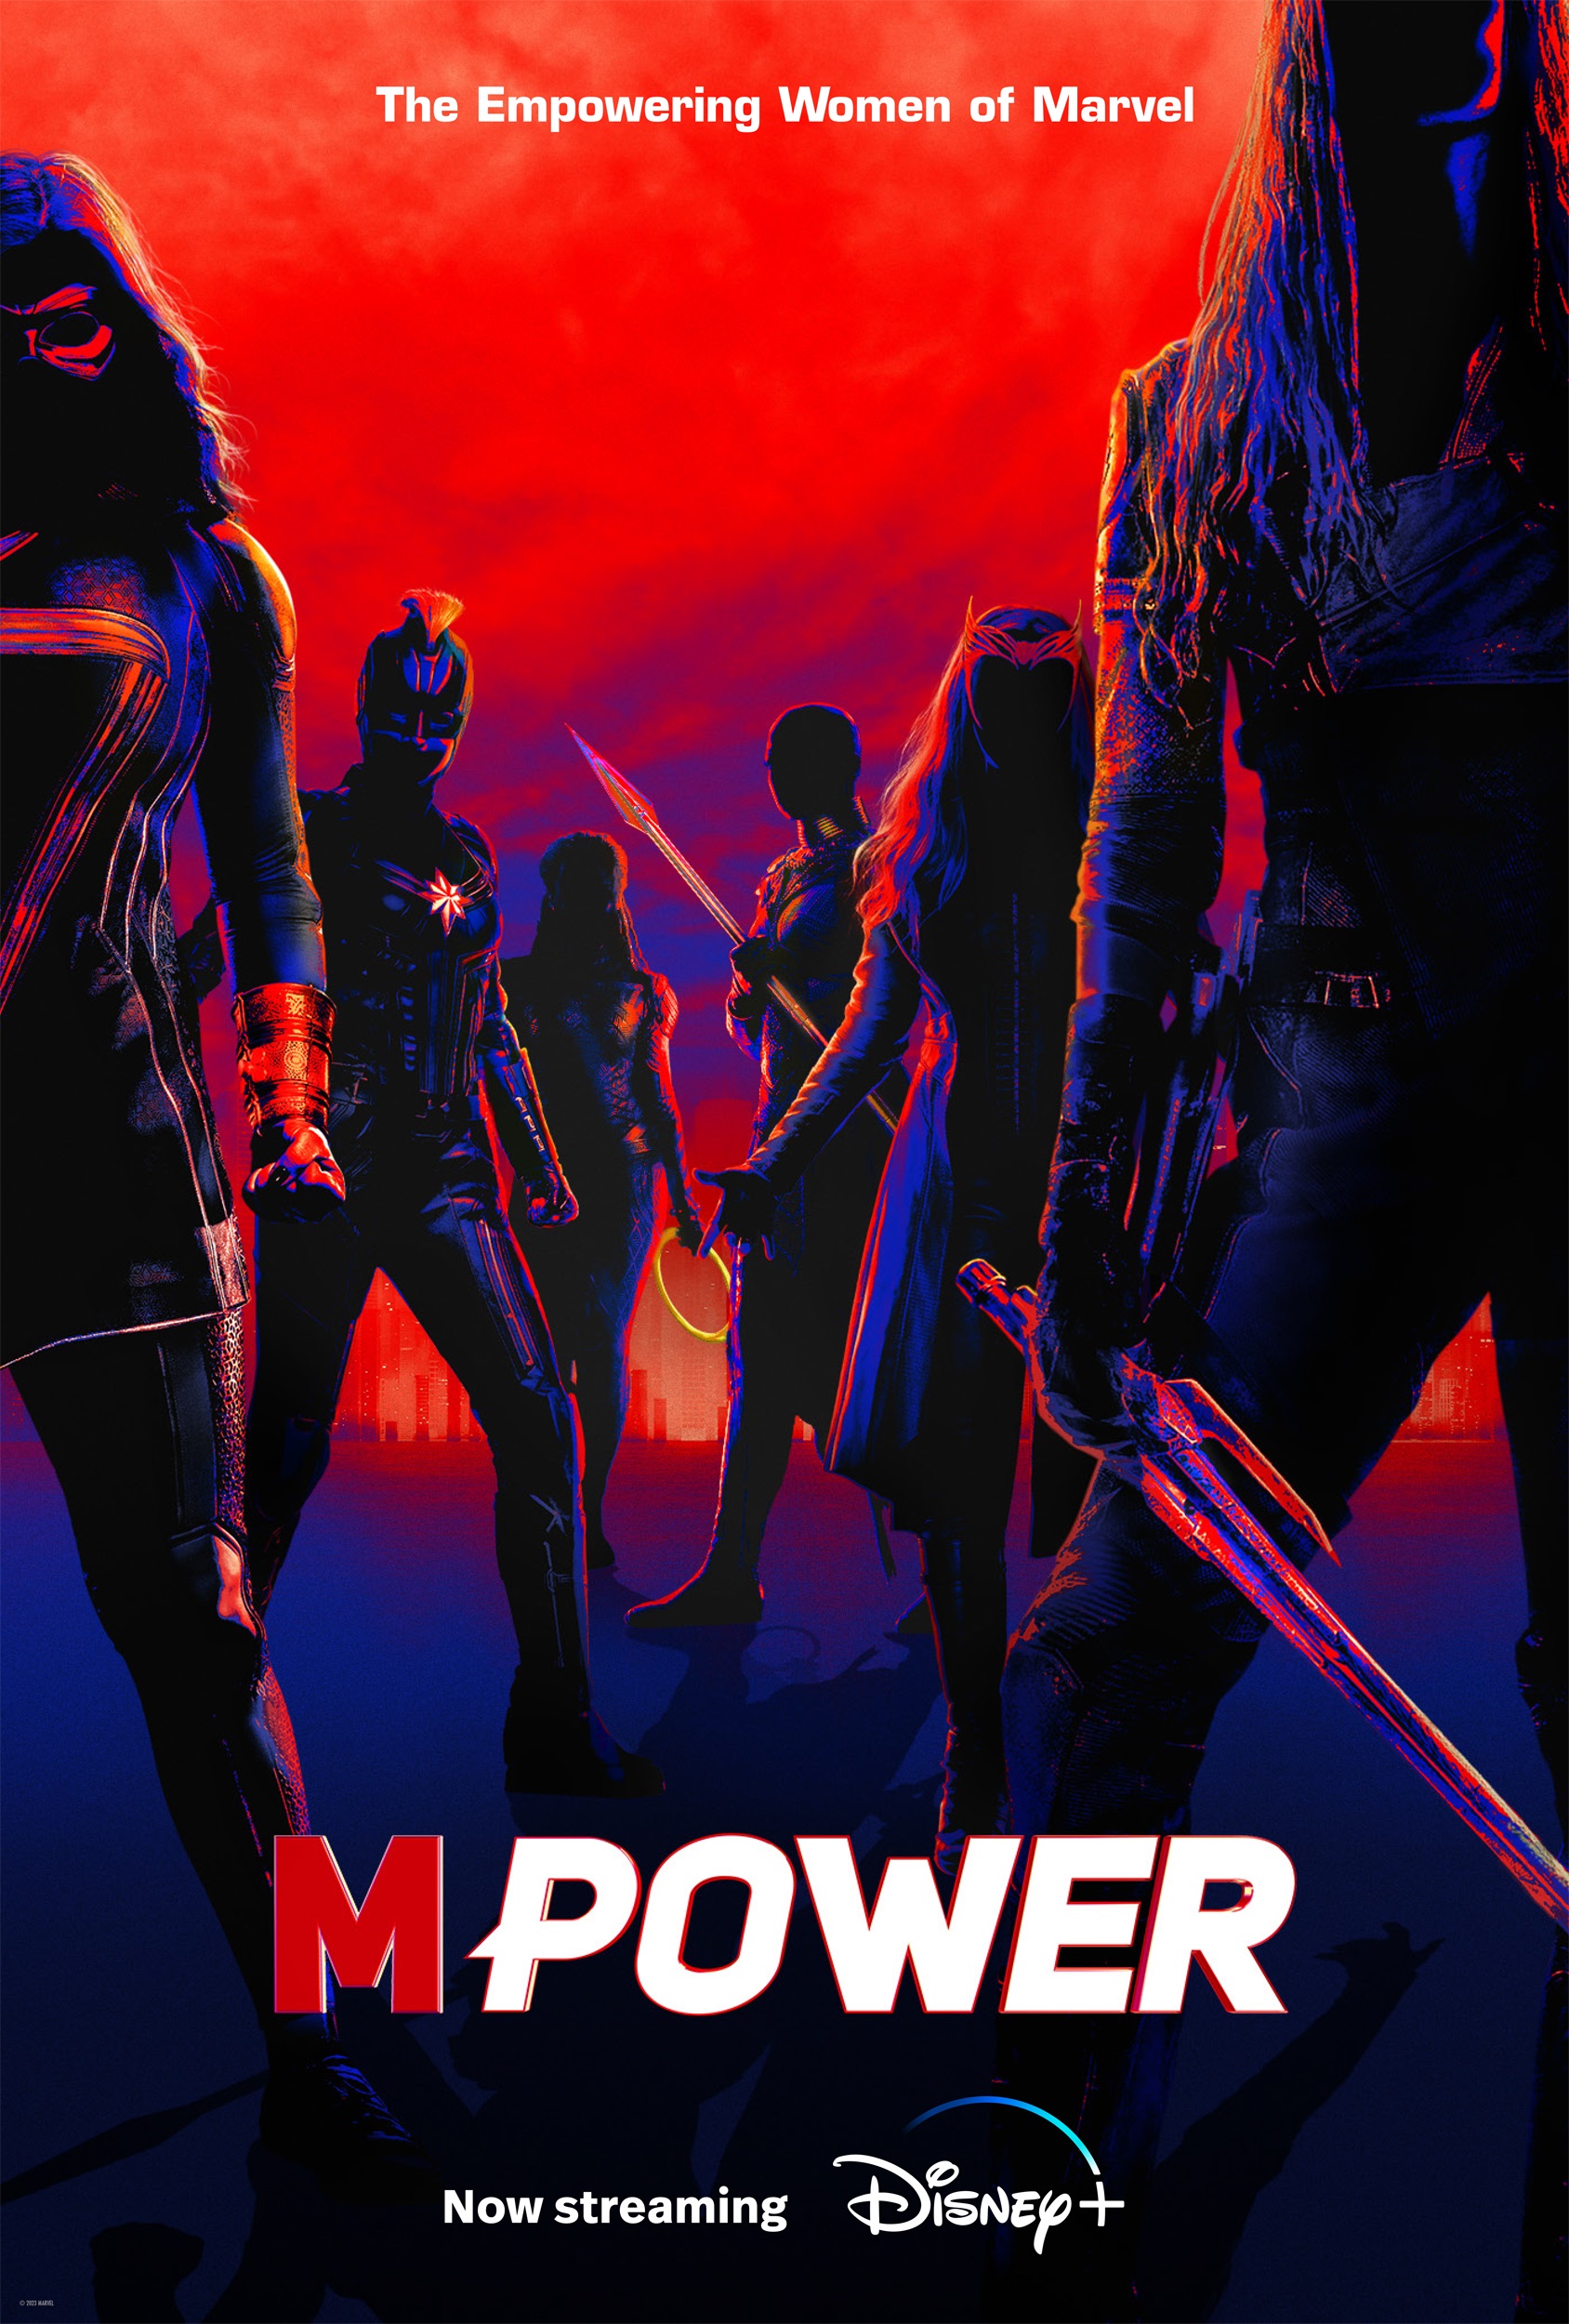 Disney+ Today Debuts New Series: “MPower”